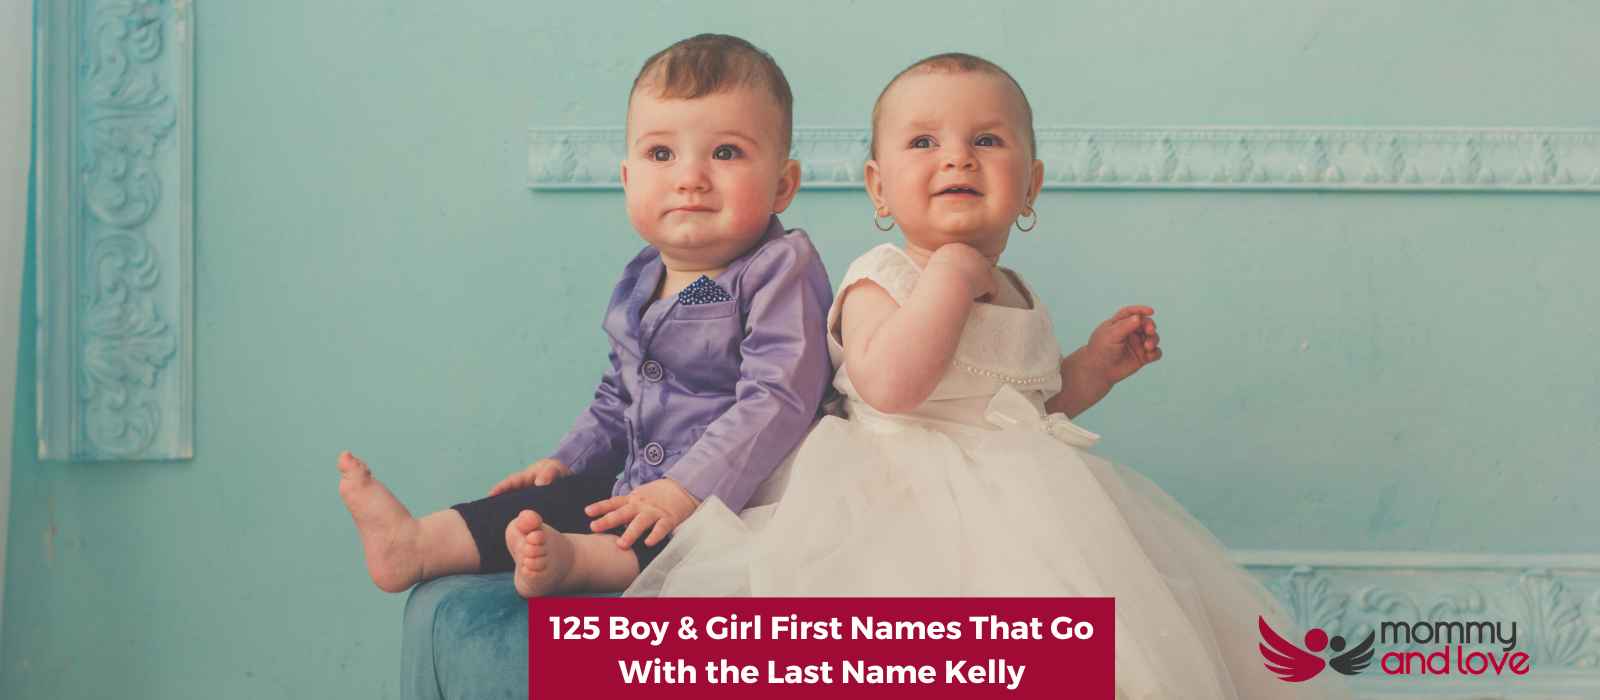 125 Boy & Girl First Names That Go With the Last Name Kelly